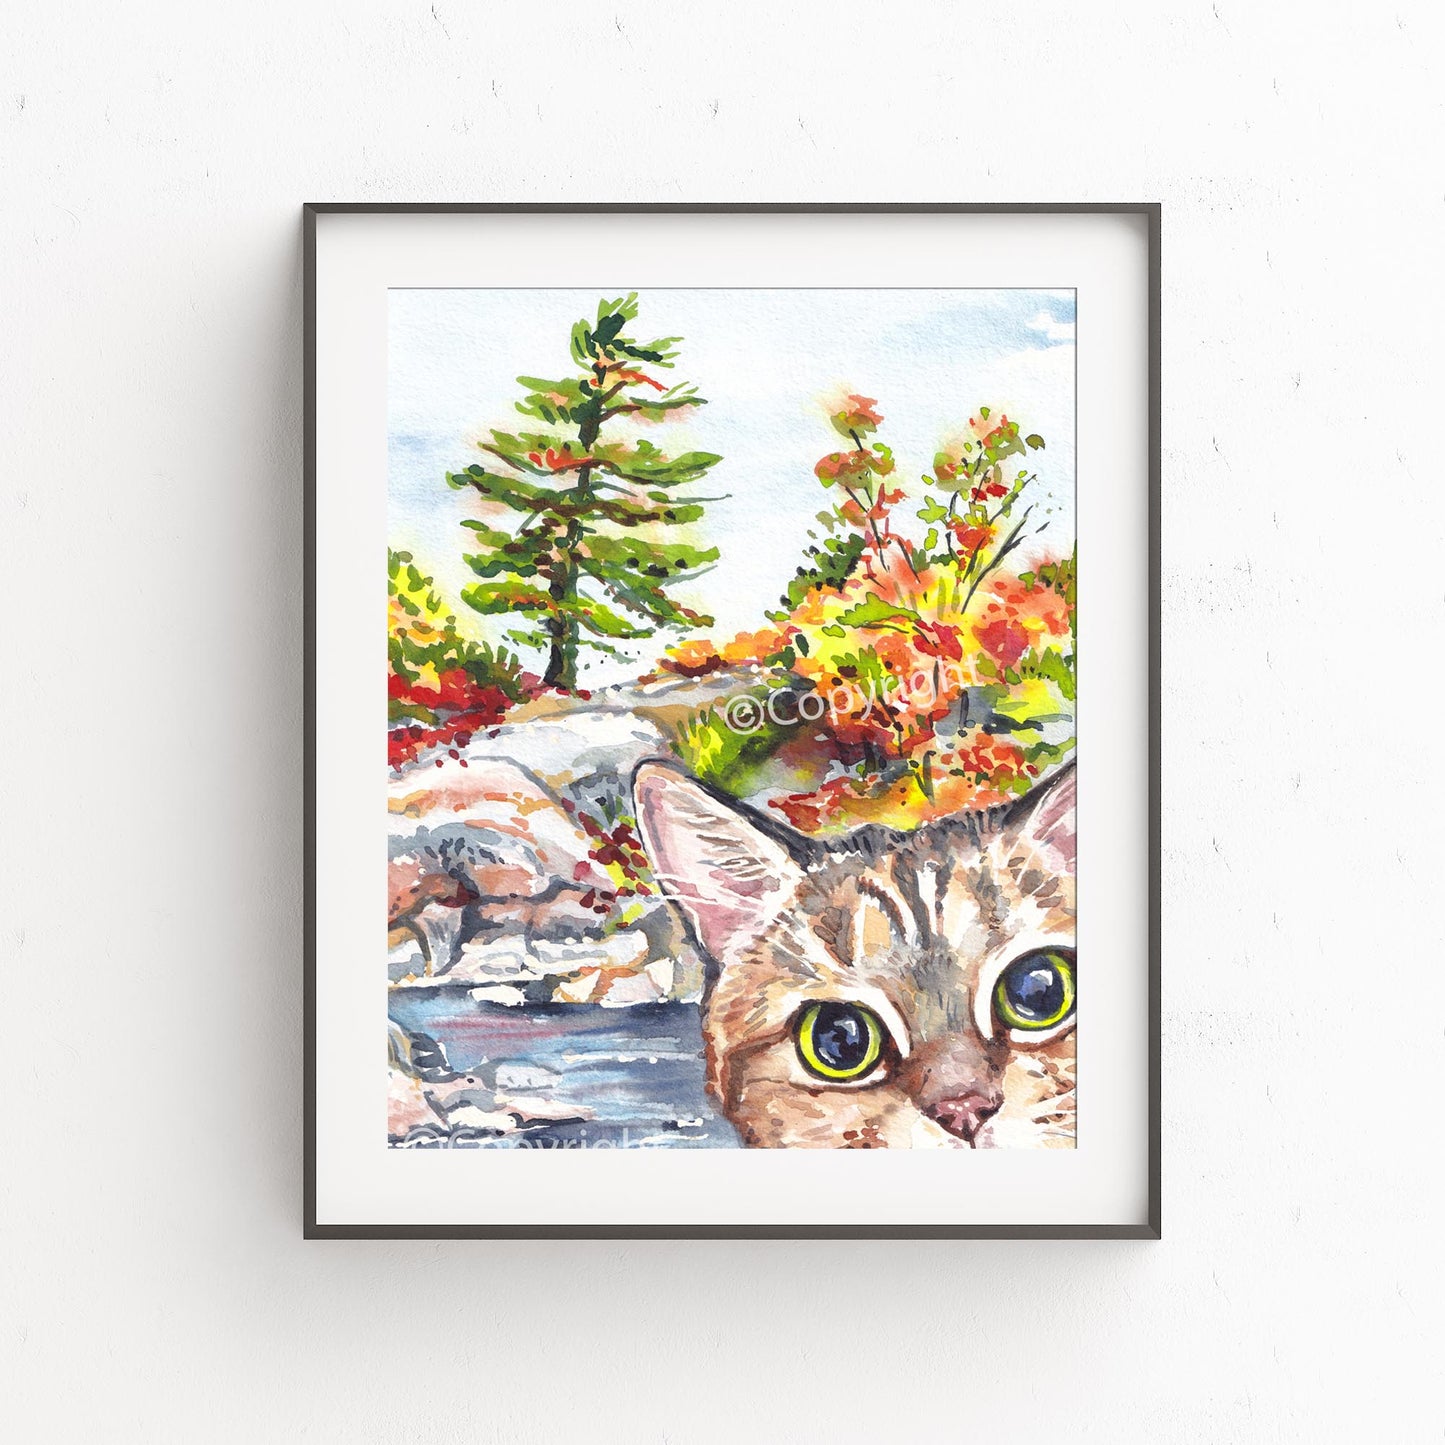 Watercolour painting of a cat photobombing a photo of an Ontario landscape. Art by Deidre Wicks